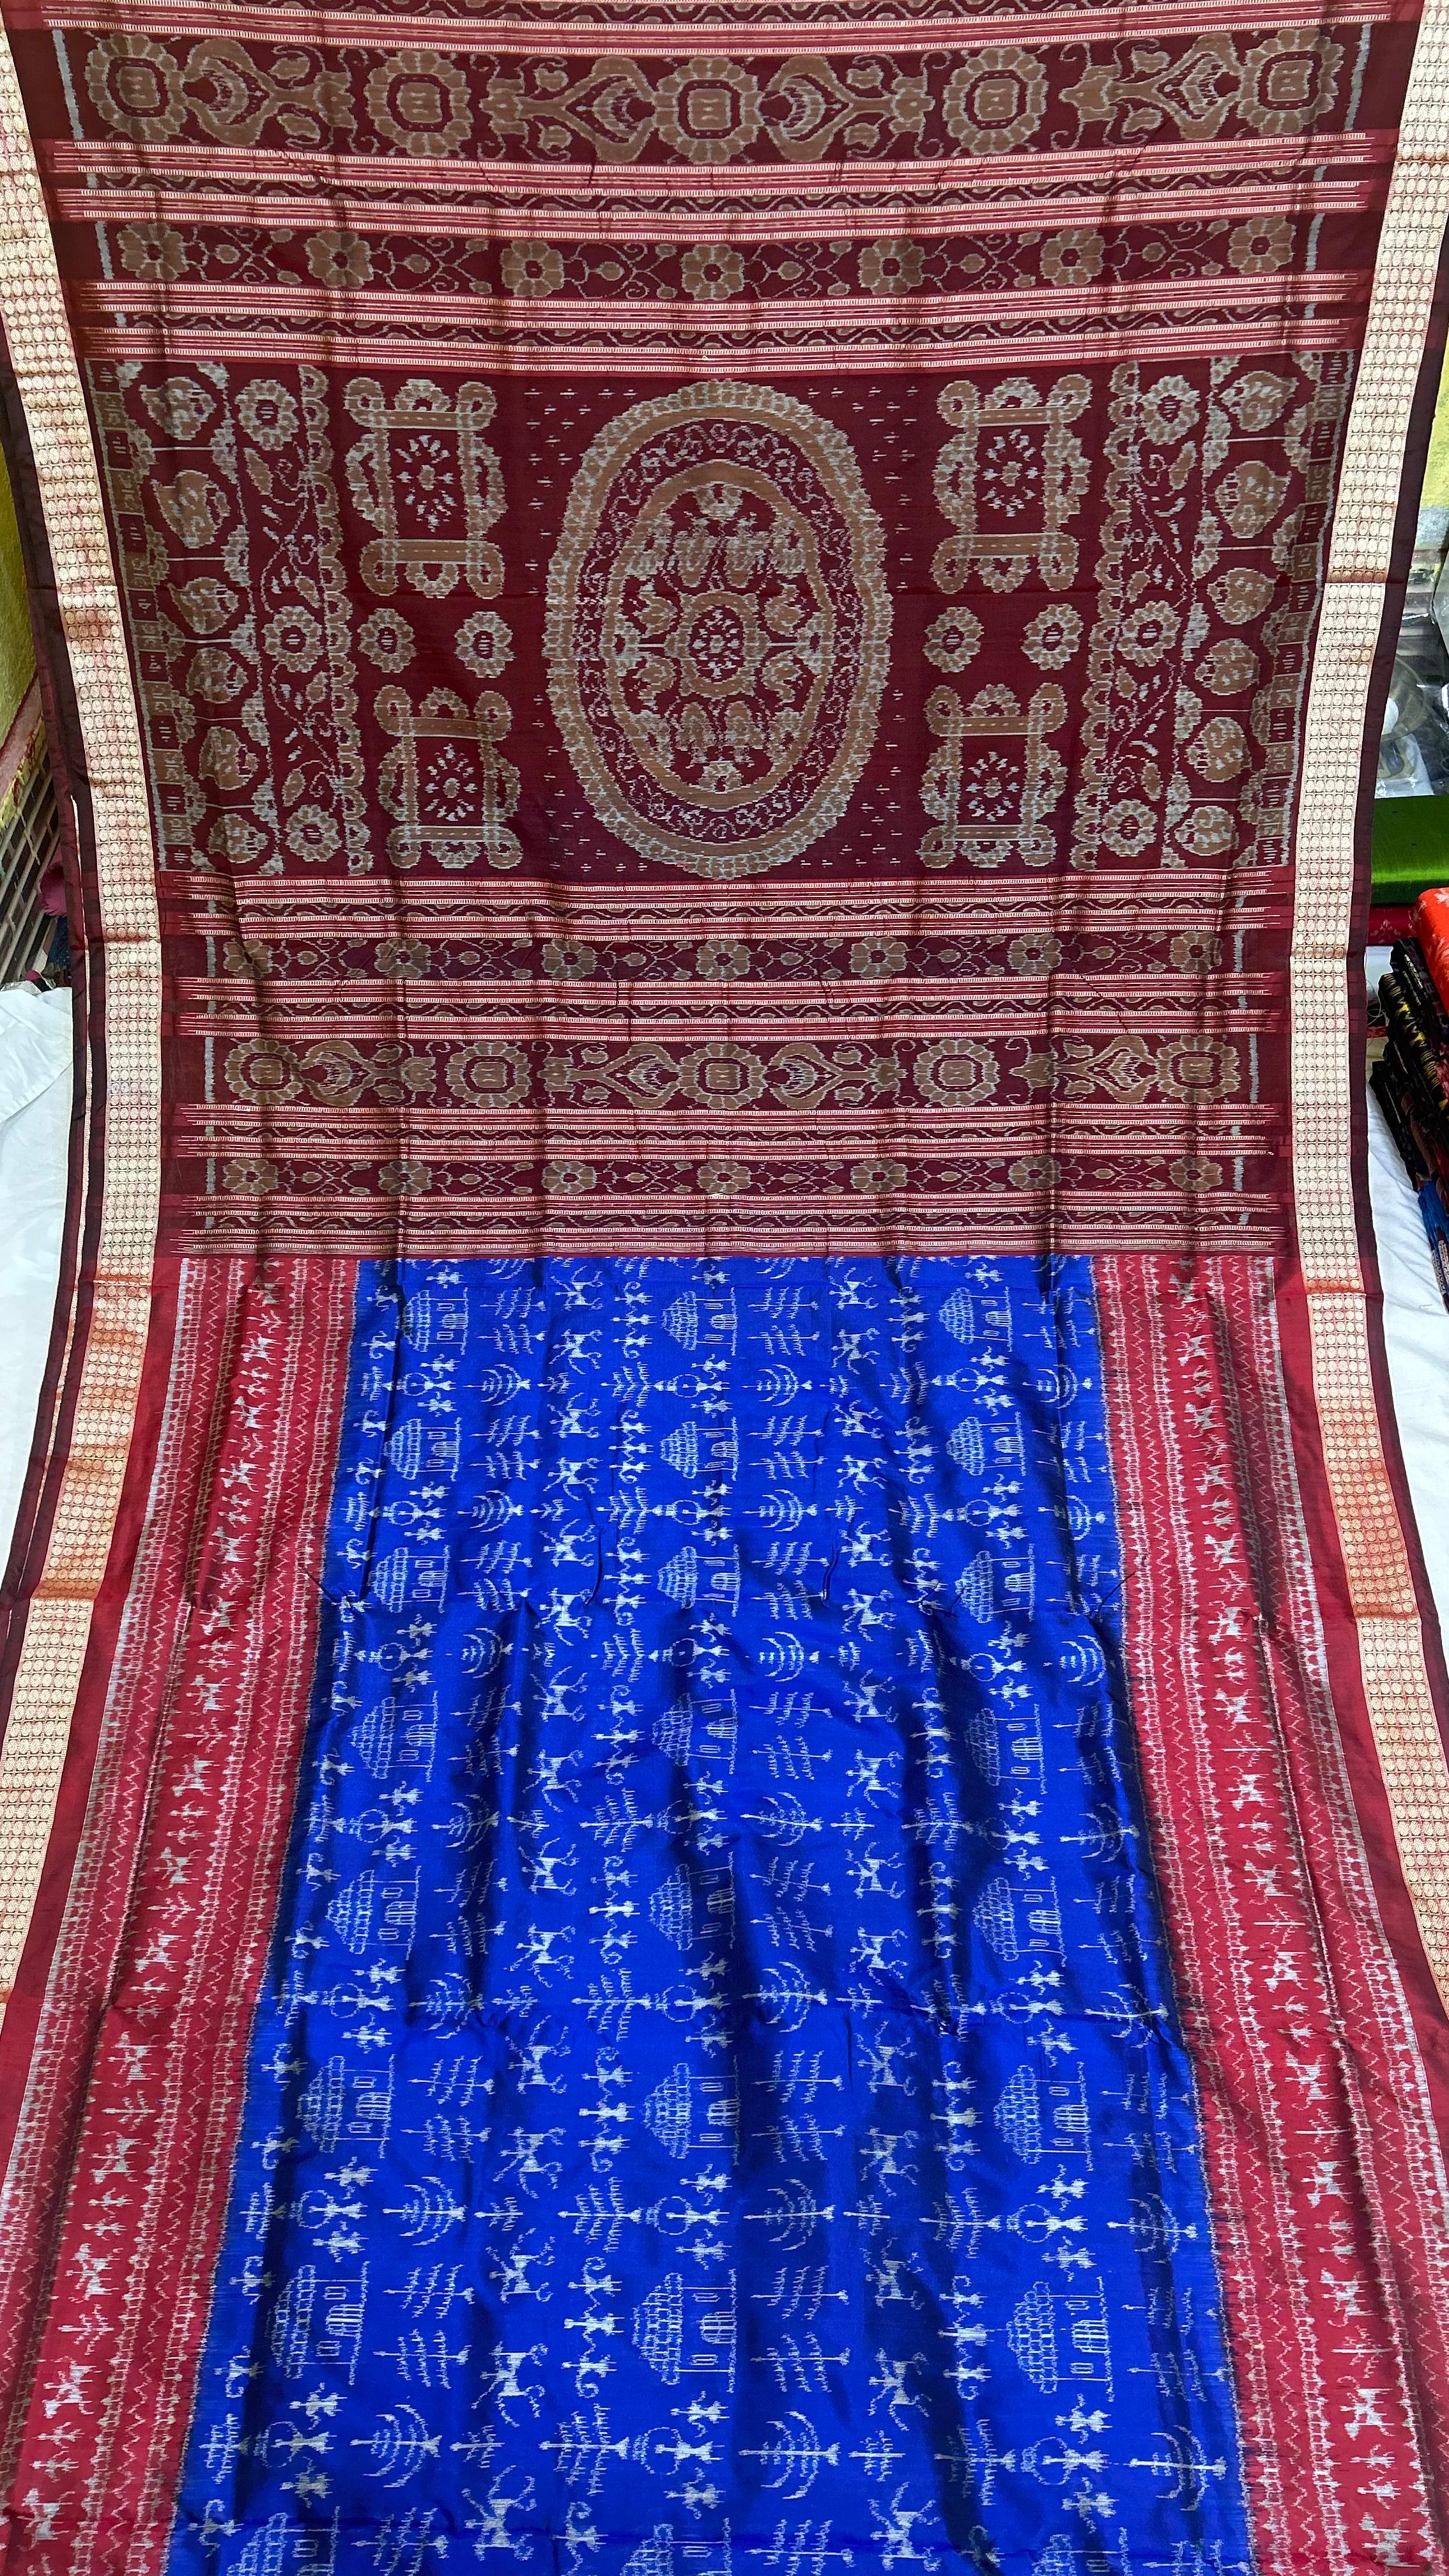 Blue and Maroon color bandha pattern pata saree, with matching blouse piece, perfect for all occasions.